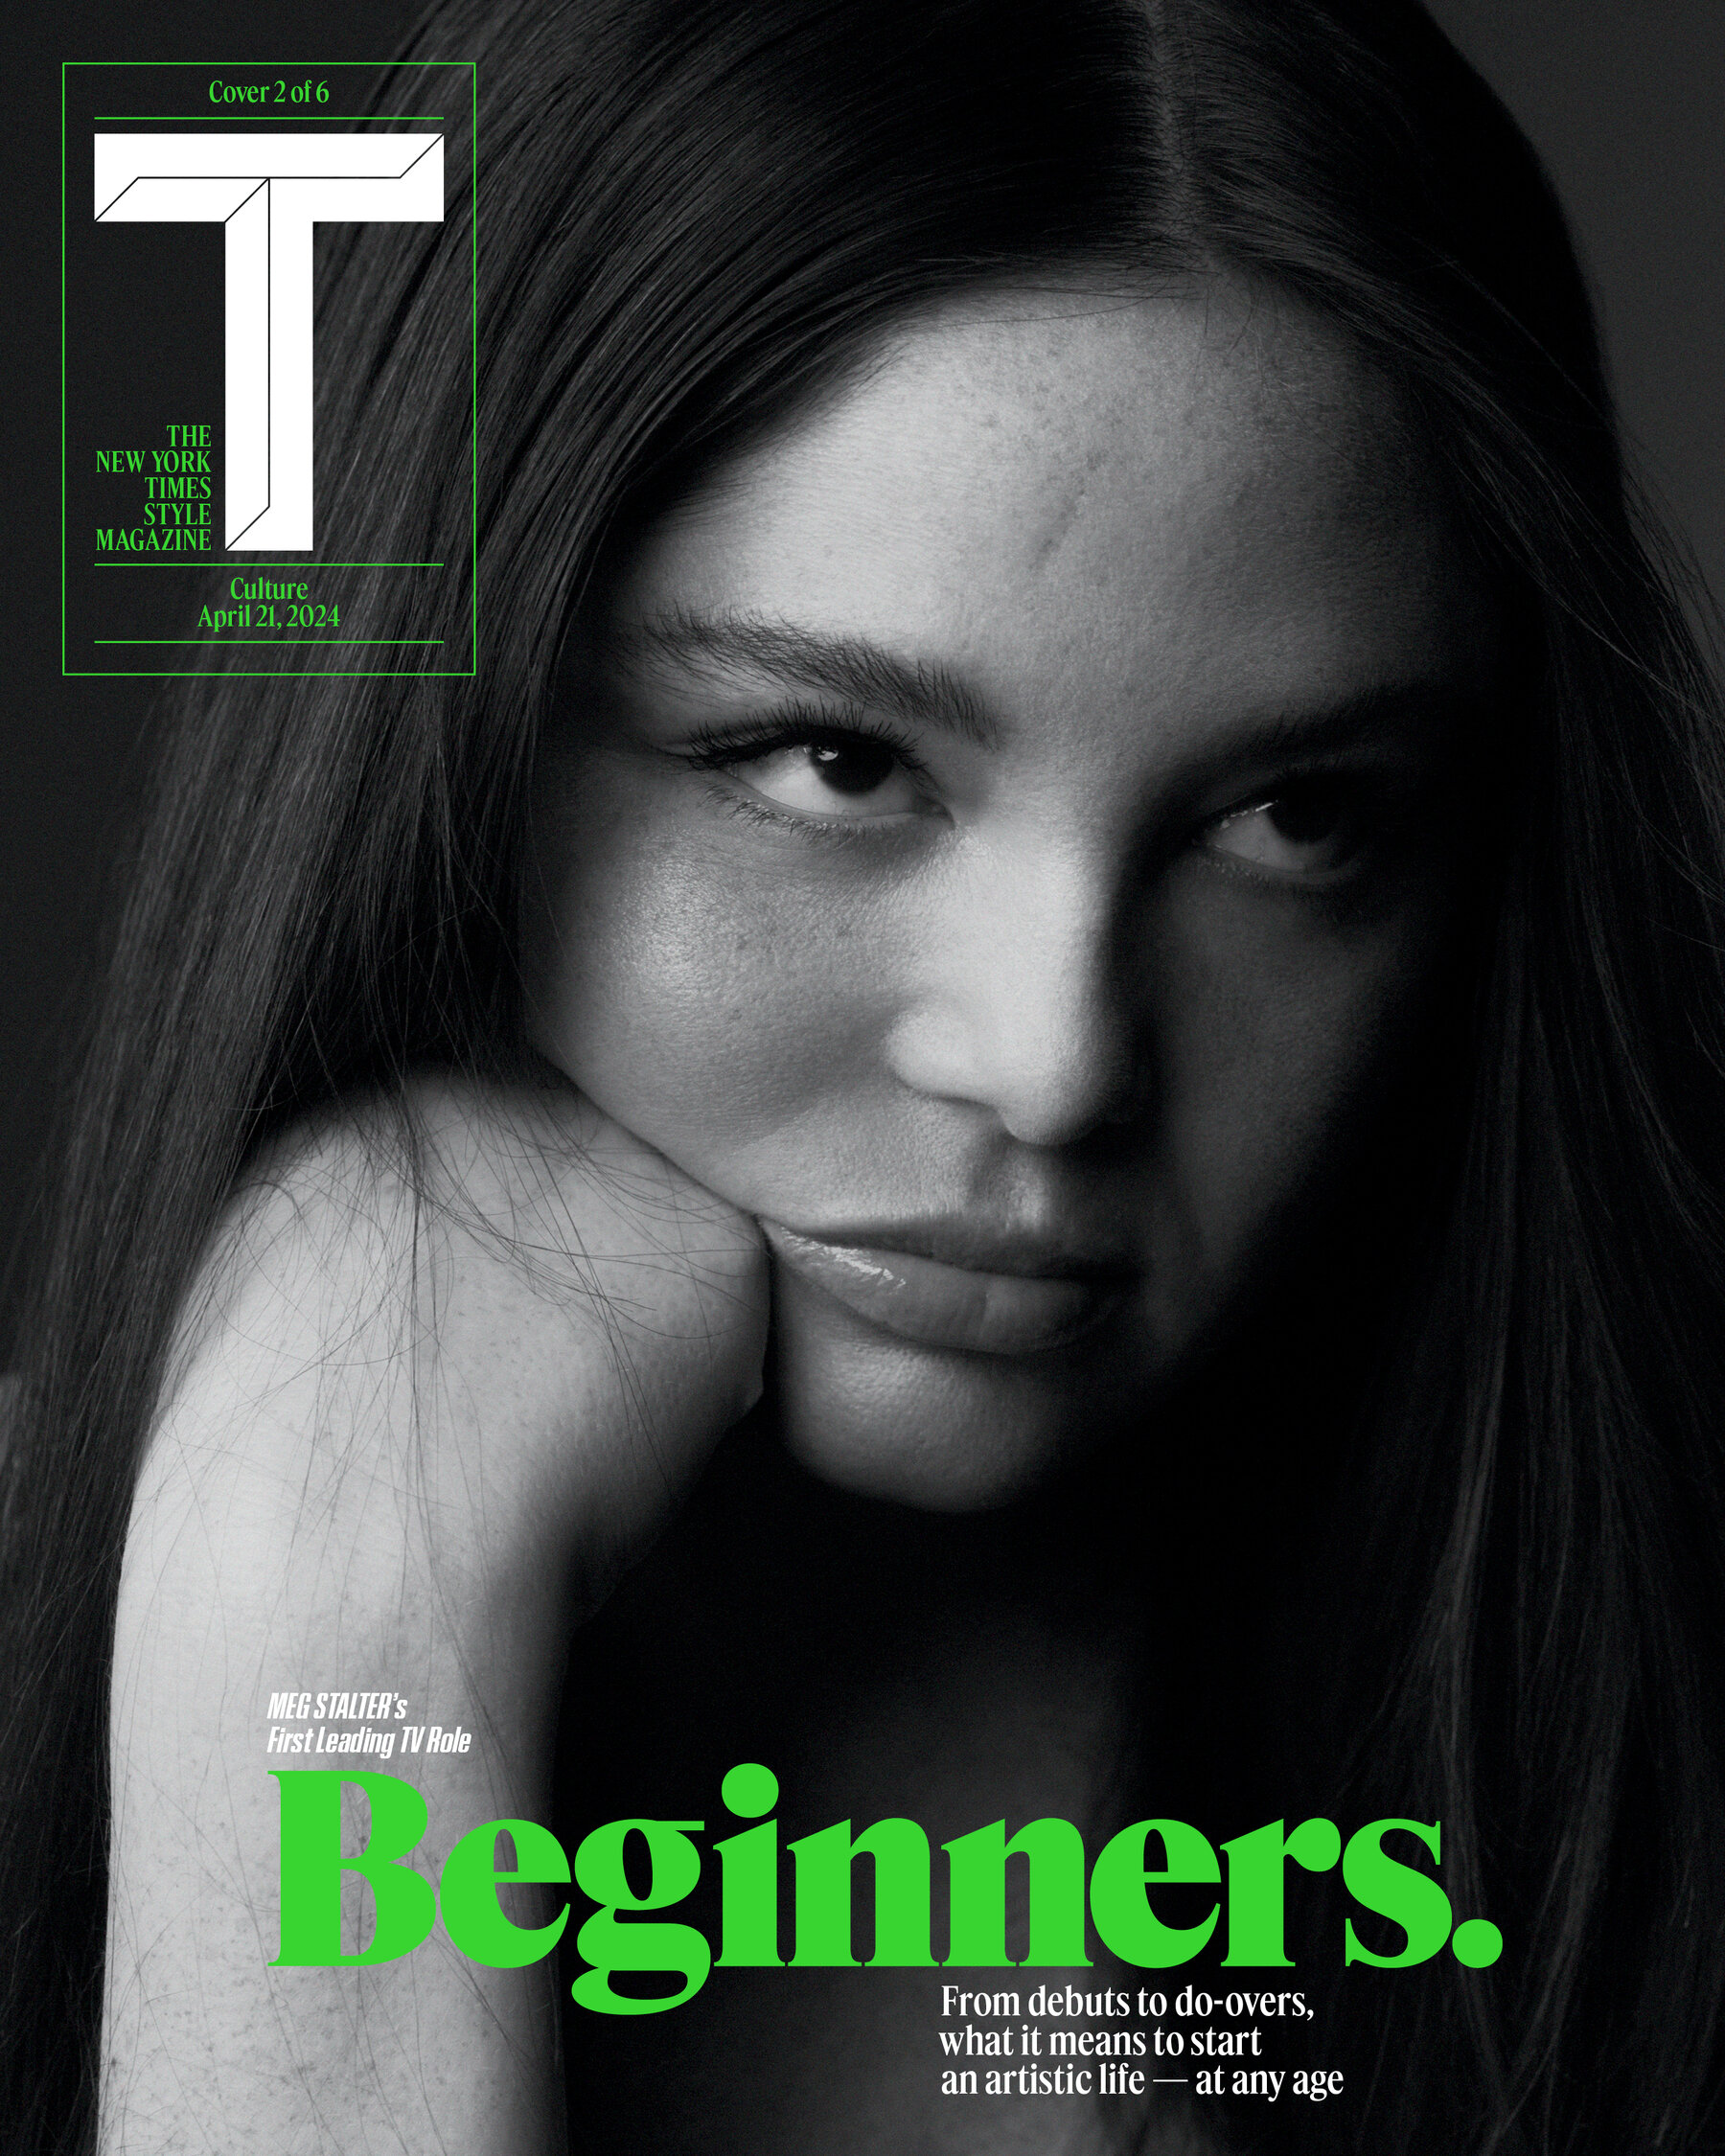 A cover of T: The New York Times Style Magazine's April 21, 2024 Culture issue, with the heading "Beginners. From debuts to do-overs, what it means to start an artistic life — at any age." The cover is a portrait of Meg Stalter with long brown hair looking bored and resting her hand on her right cheek.